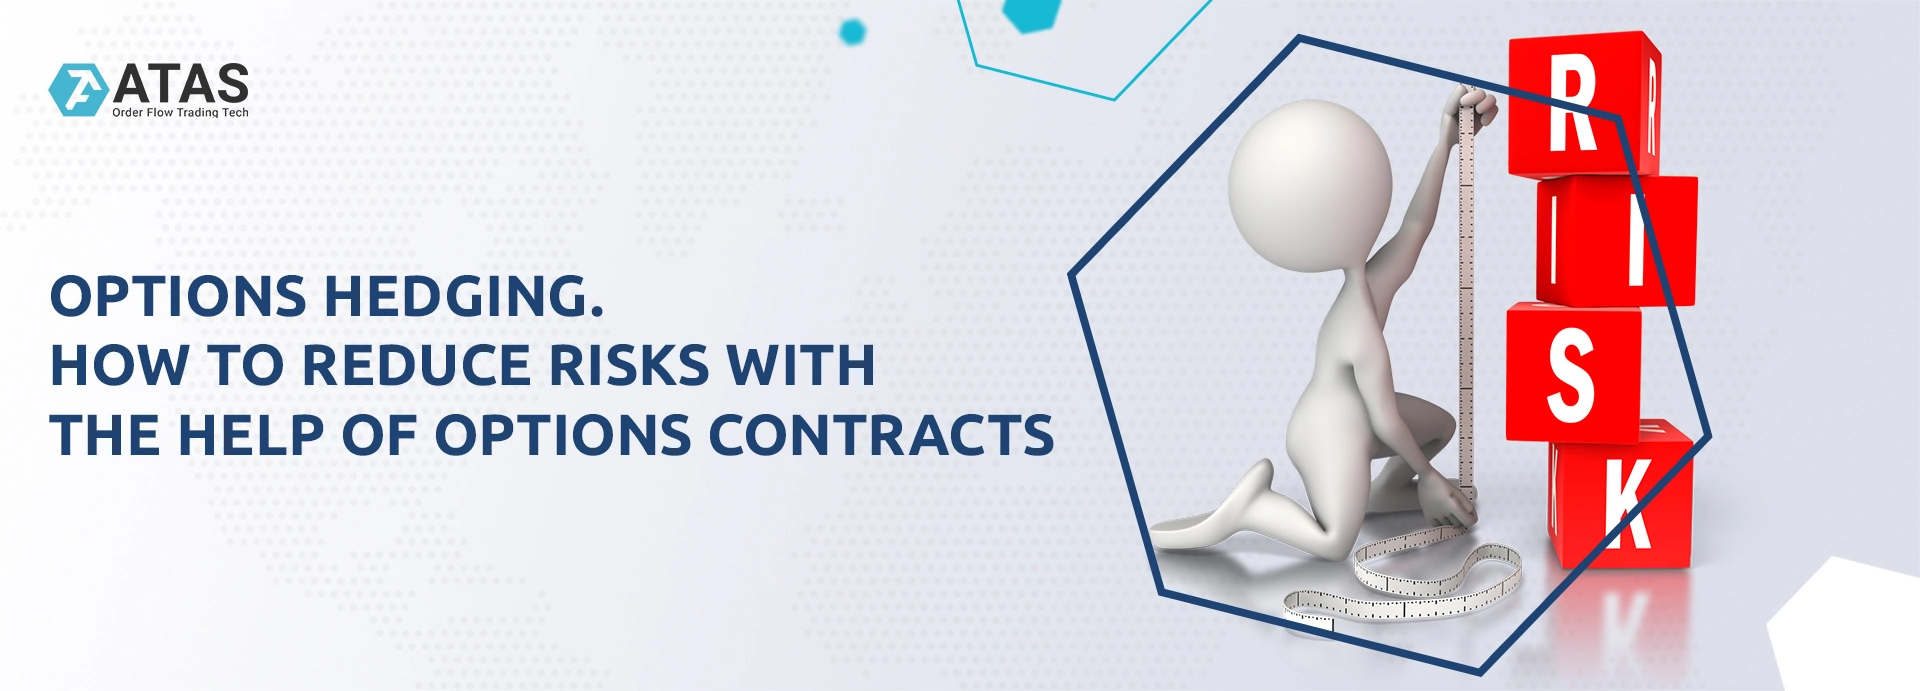 Options hedging. How to reduce risks with the help of options contracts